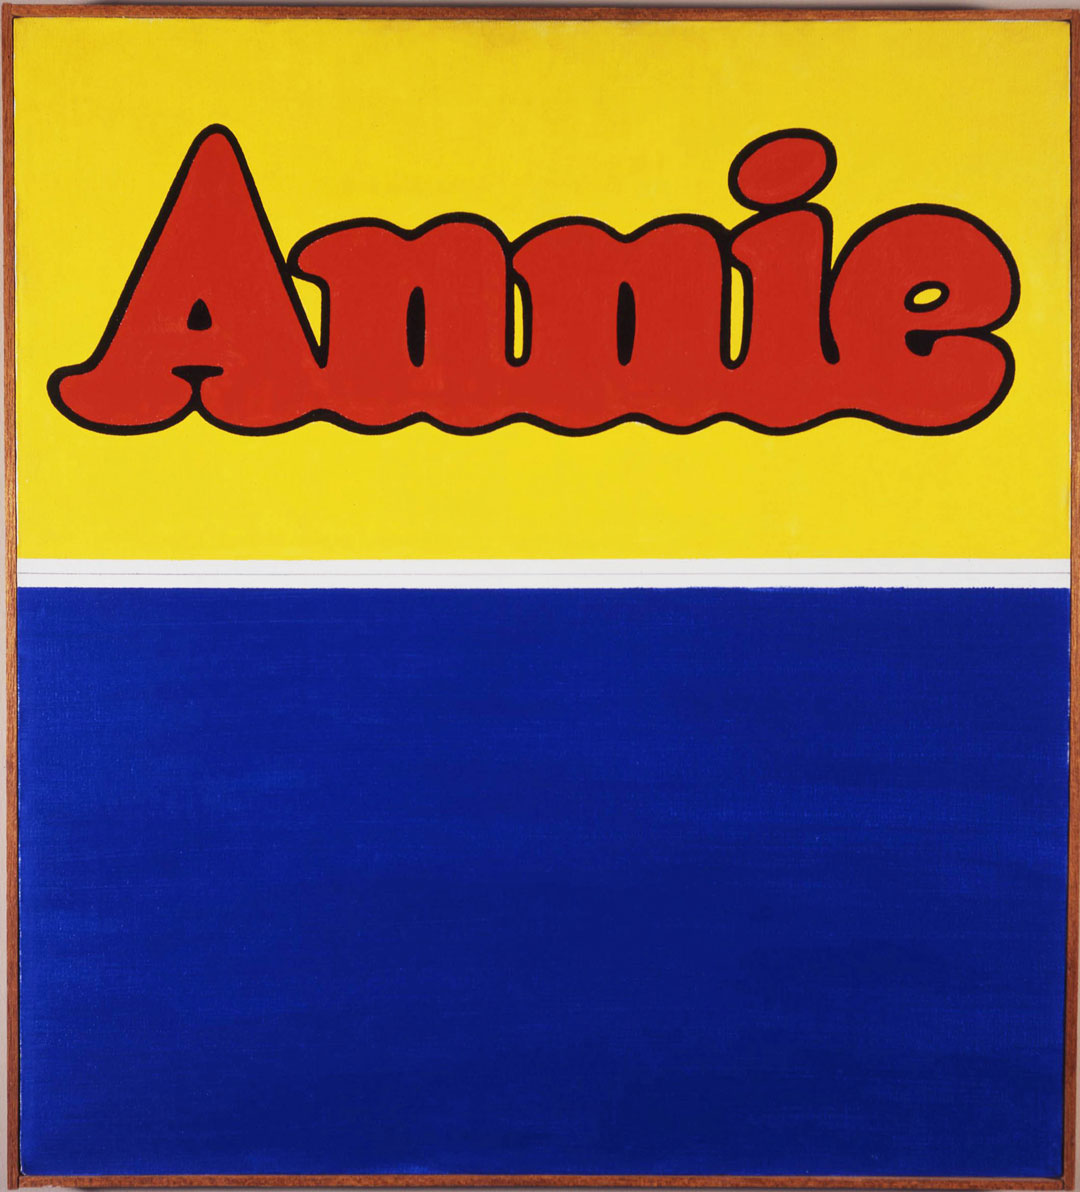 Image of artwork Annie by Ed Ruscha